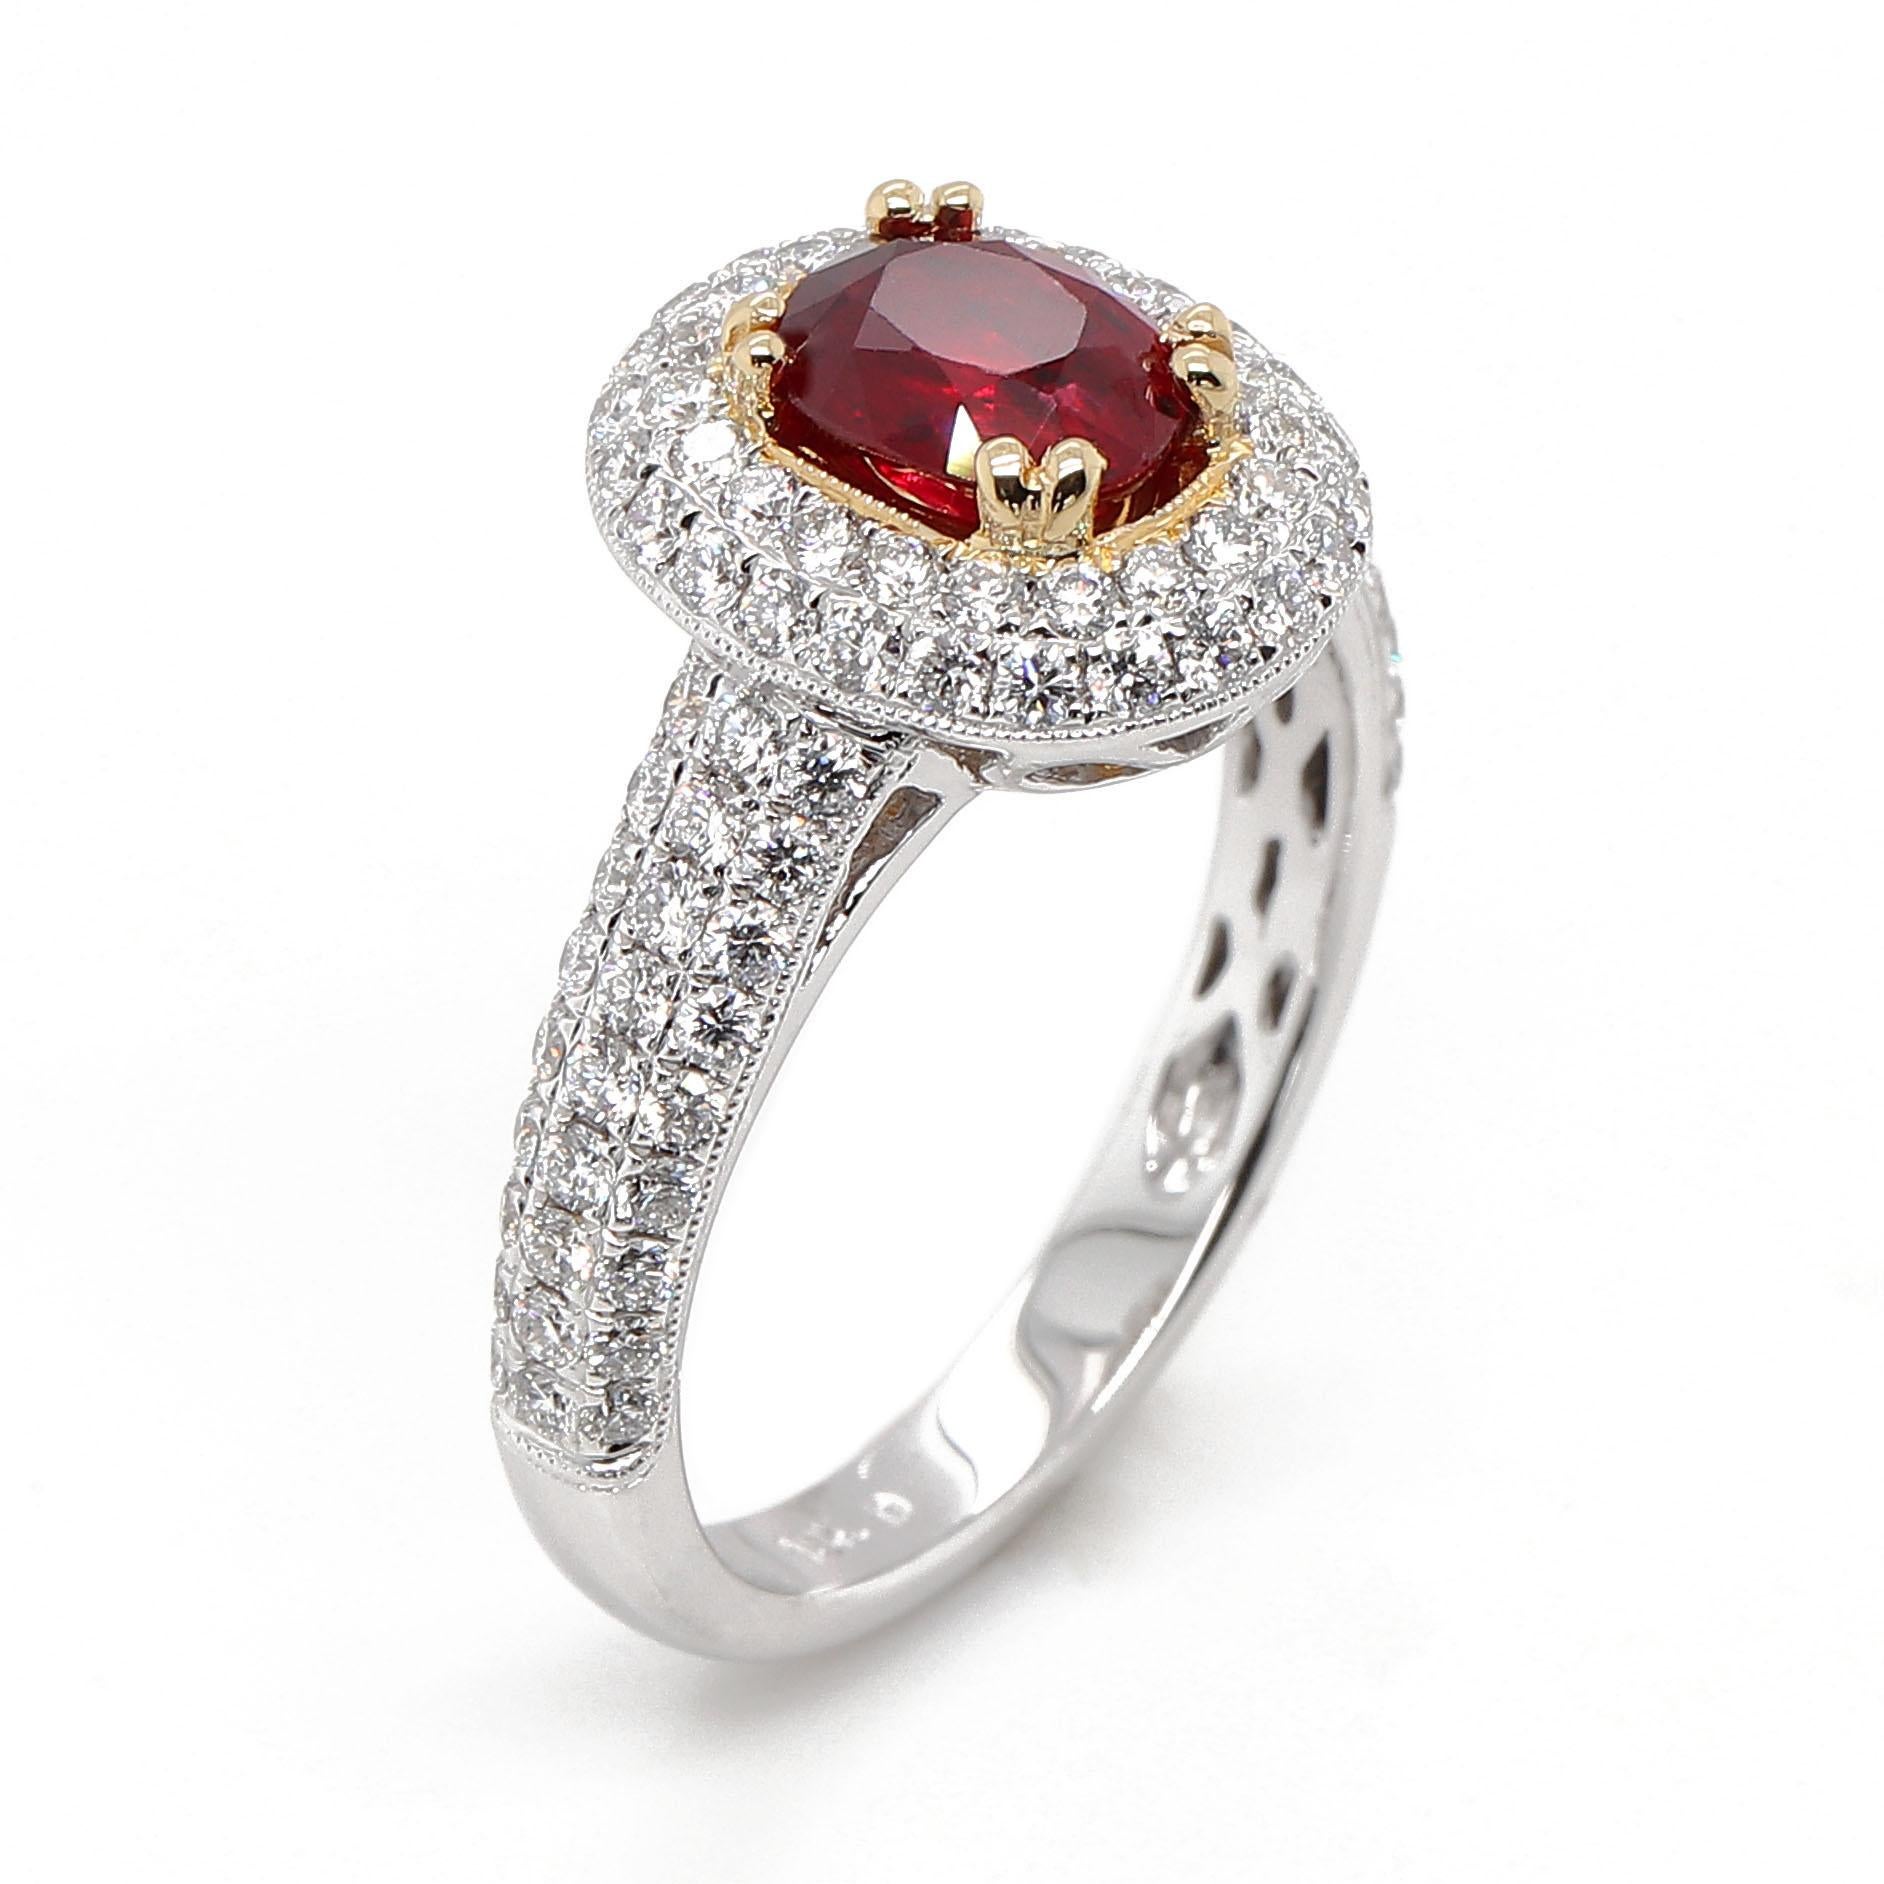 One GIA certified vv fine oval Ruby of about 1.03 carats surrounded by 98 round brilliant cut Diamonds of about 0.85 carats with a clarity of SI and color G. All stones are set in 18k 2 tone gold. The total weight of the ring is approximately 4.97